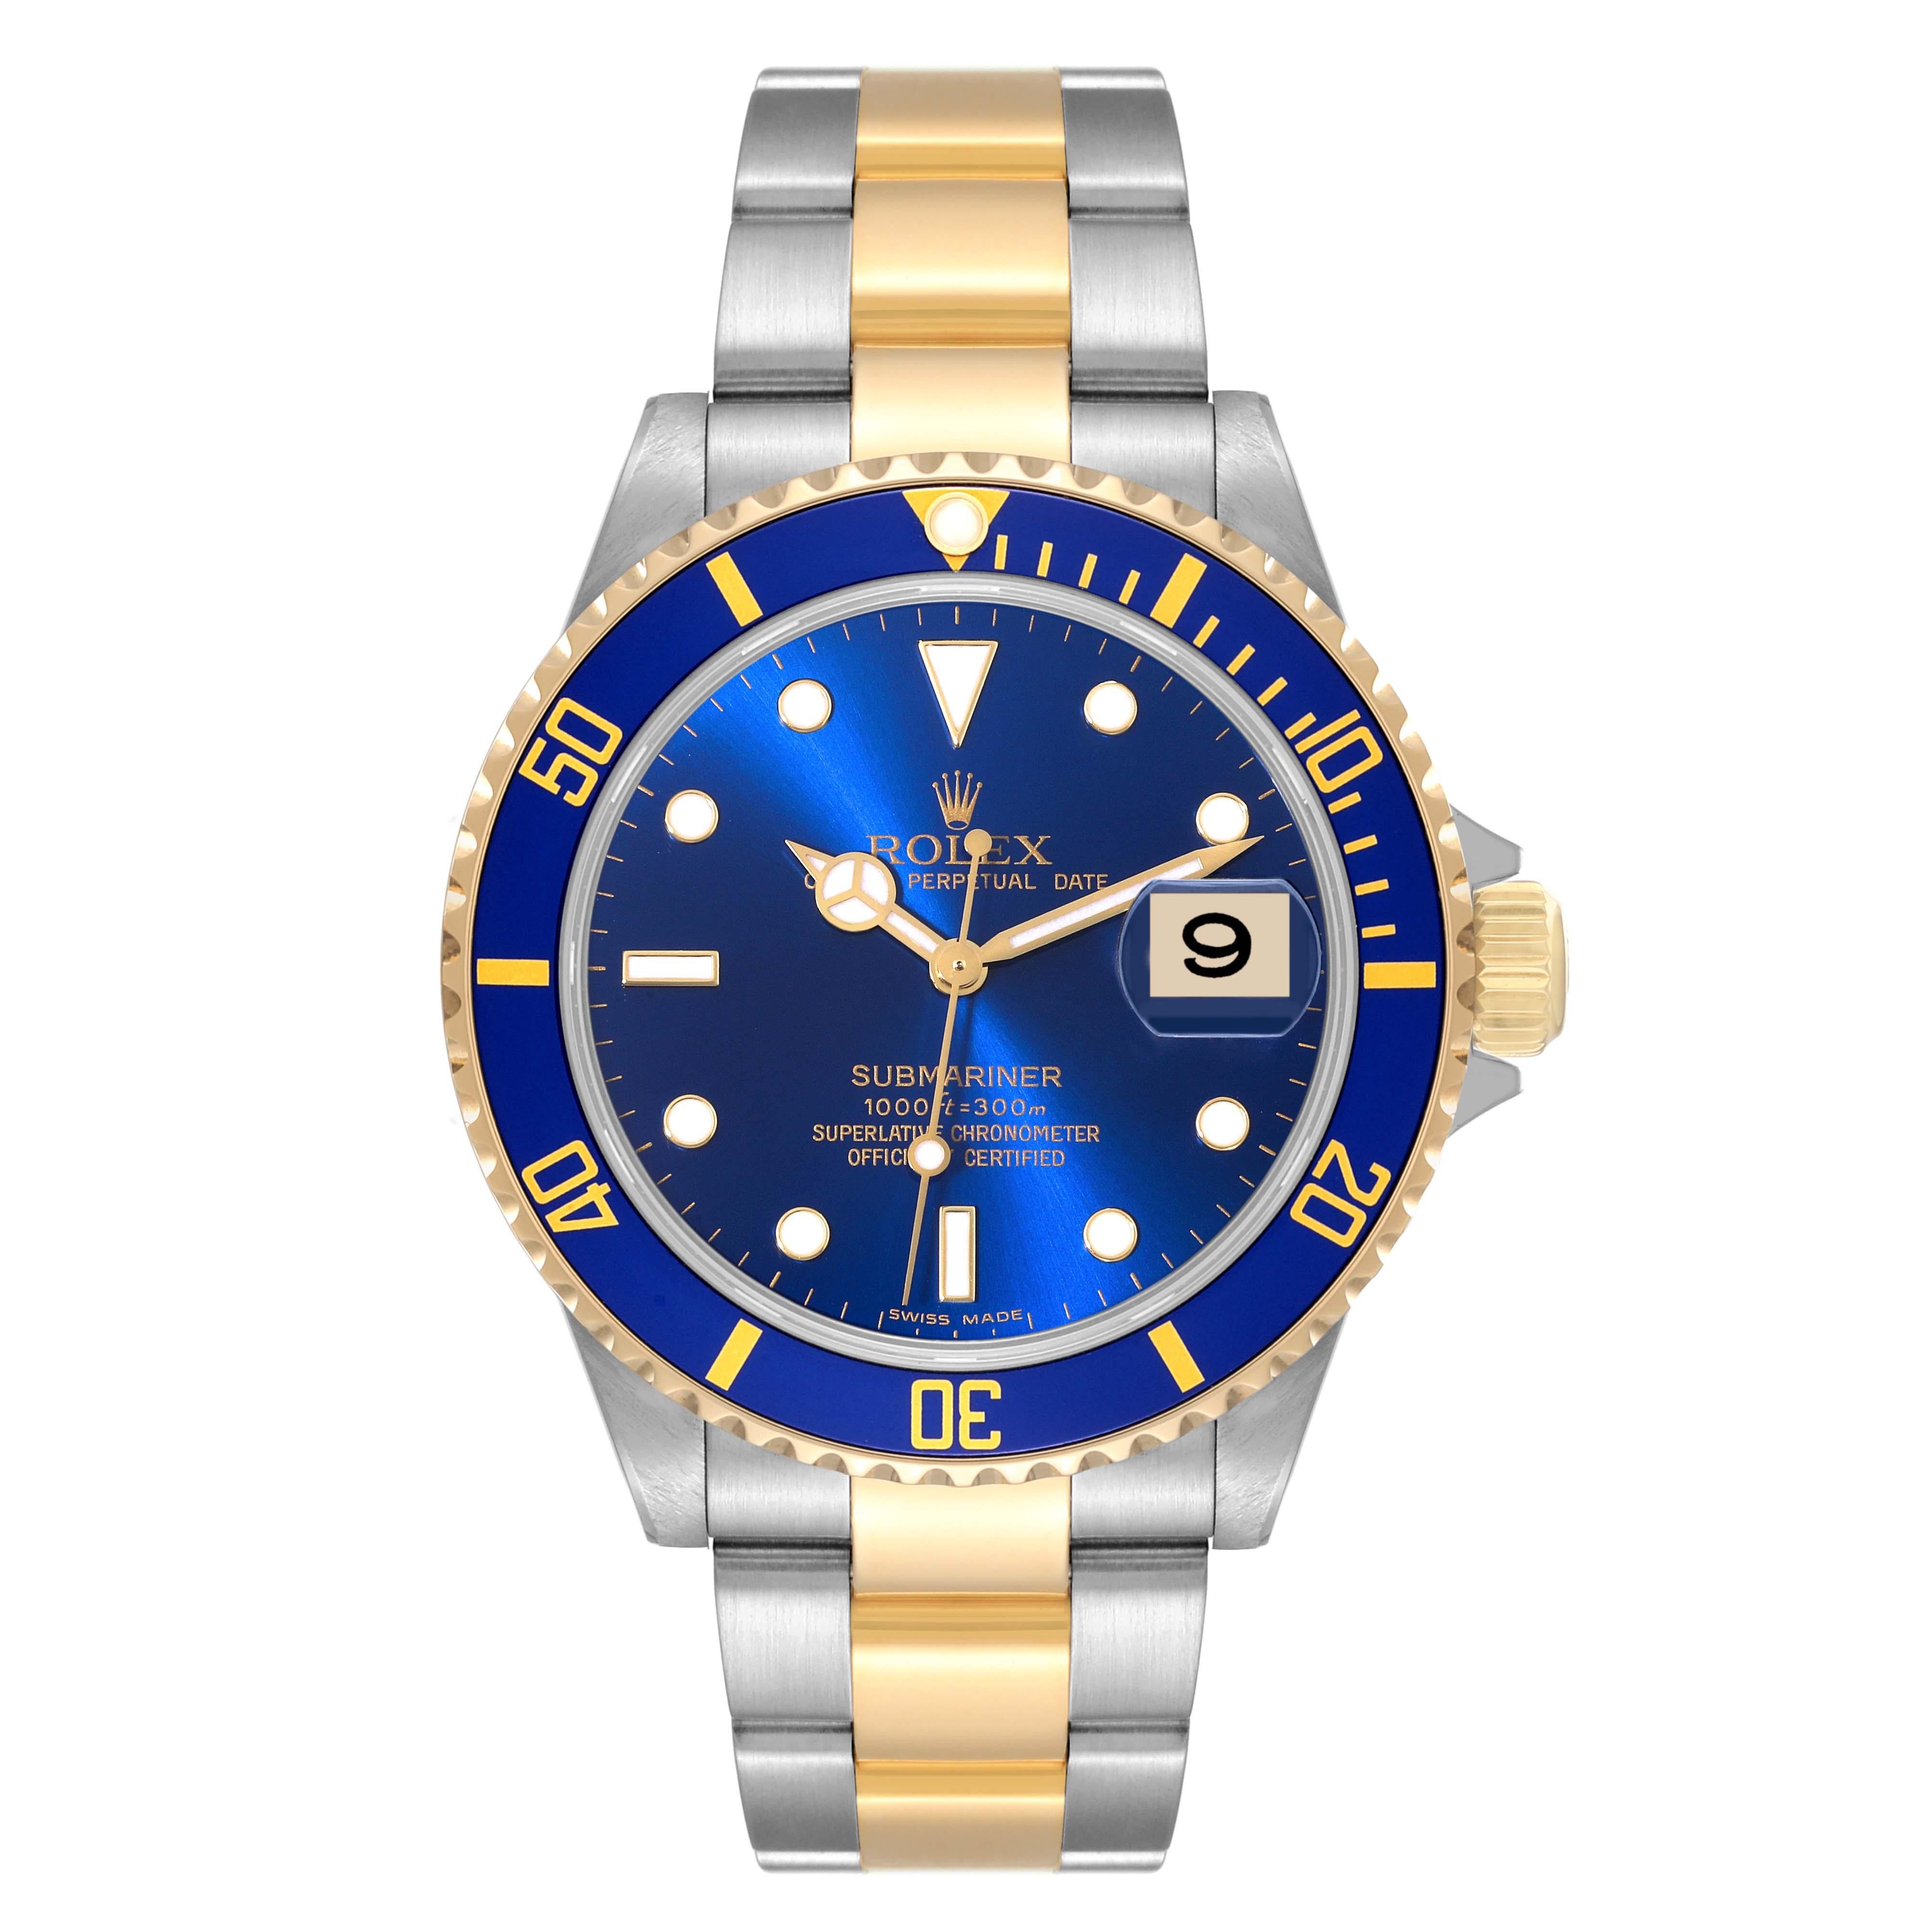 Rolex Submariner Steel Yellow Gold Blue Dial Mens Watch 116613 Box Card. Officially certified chronometer automatic self-winding movement. Stainless steel and 18k yellow gold case 40.0 mm in diameter. Rolex logo on the crown. Ceramic blue Ion-plated